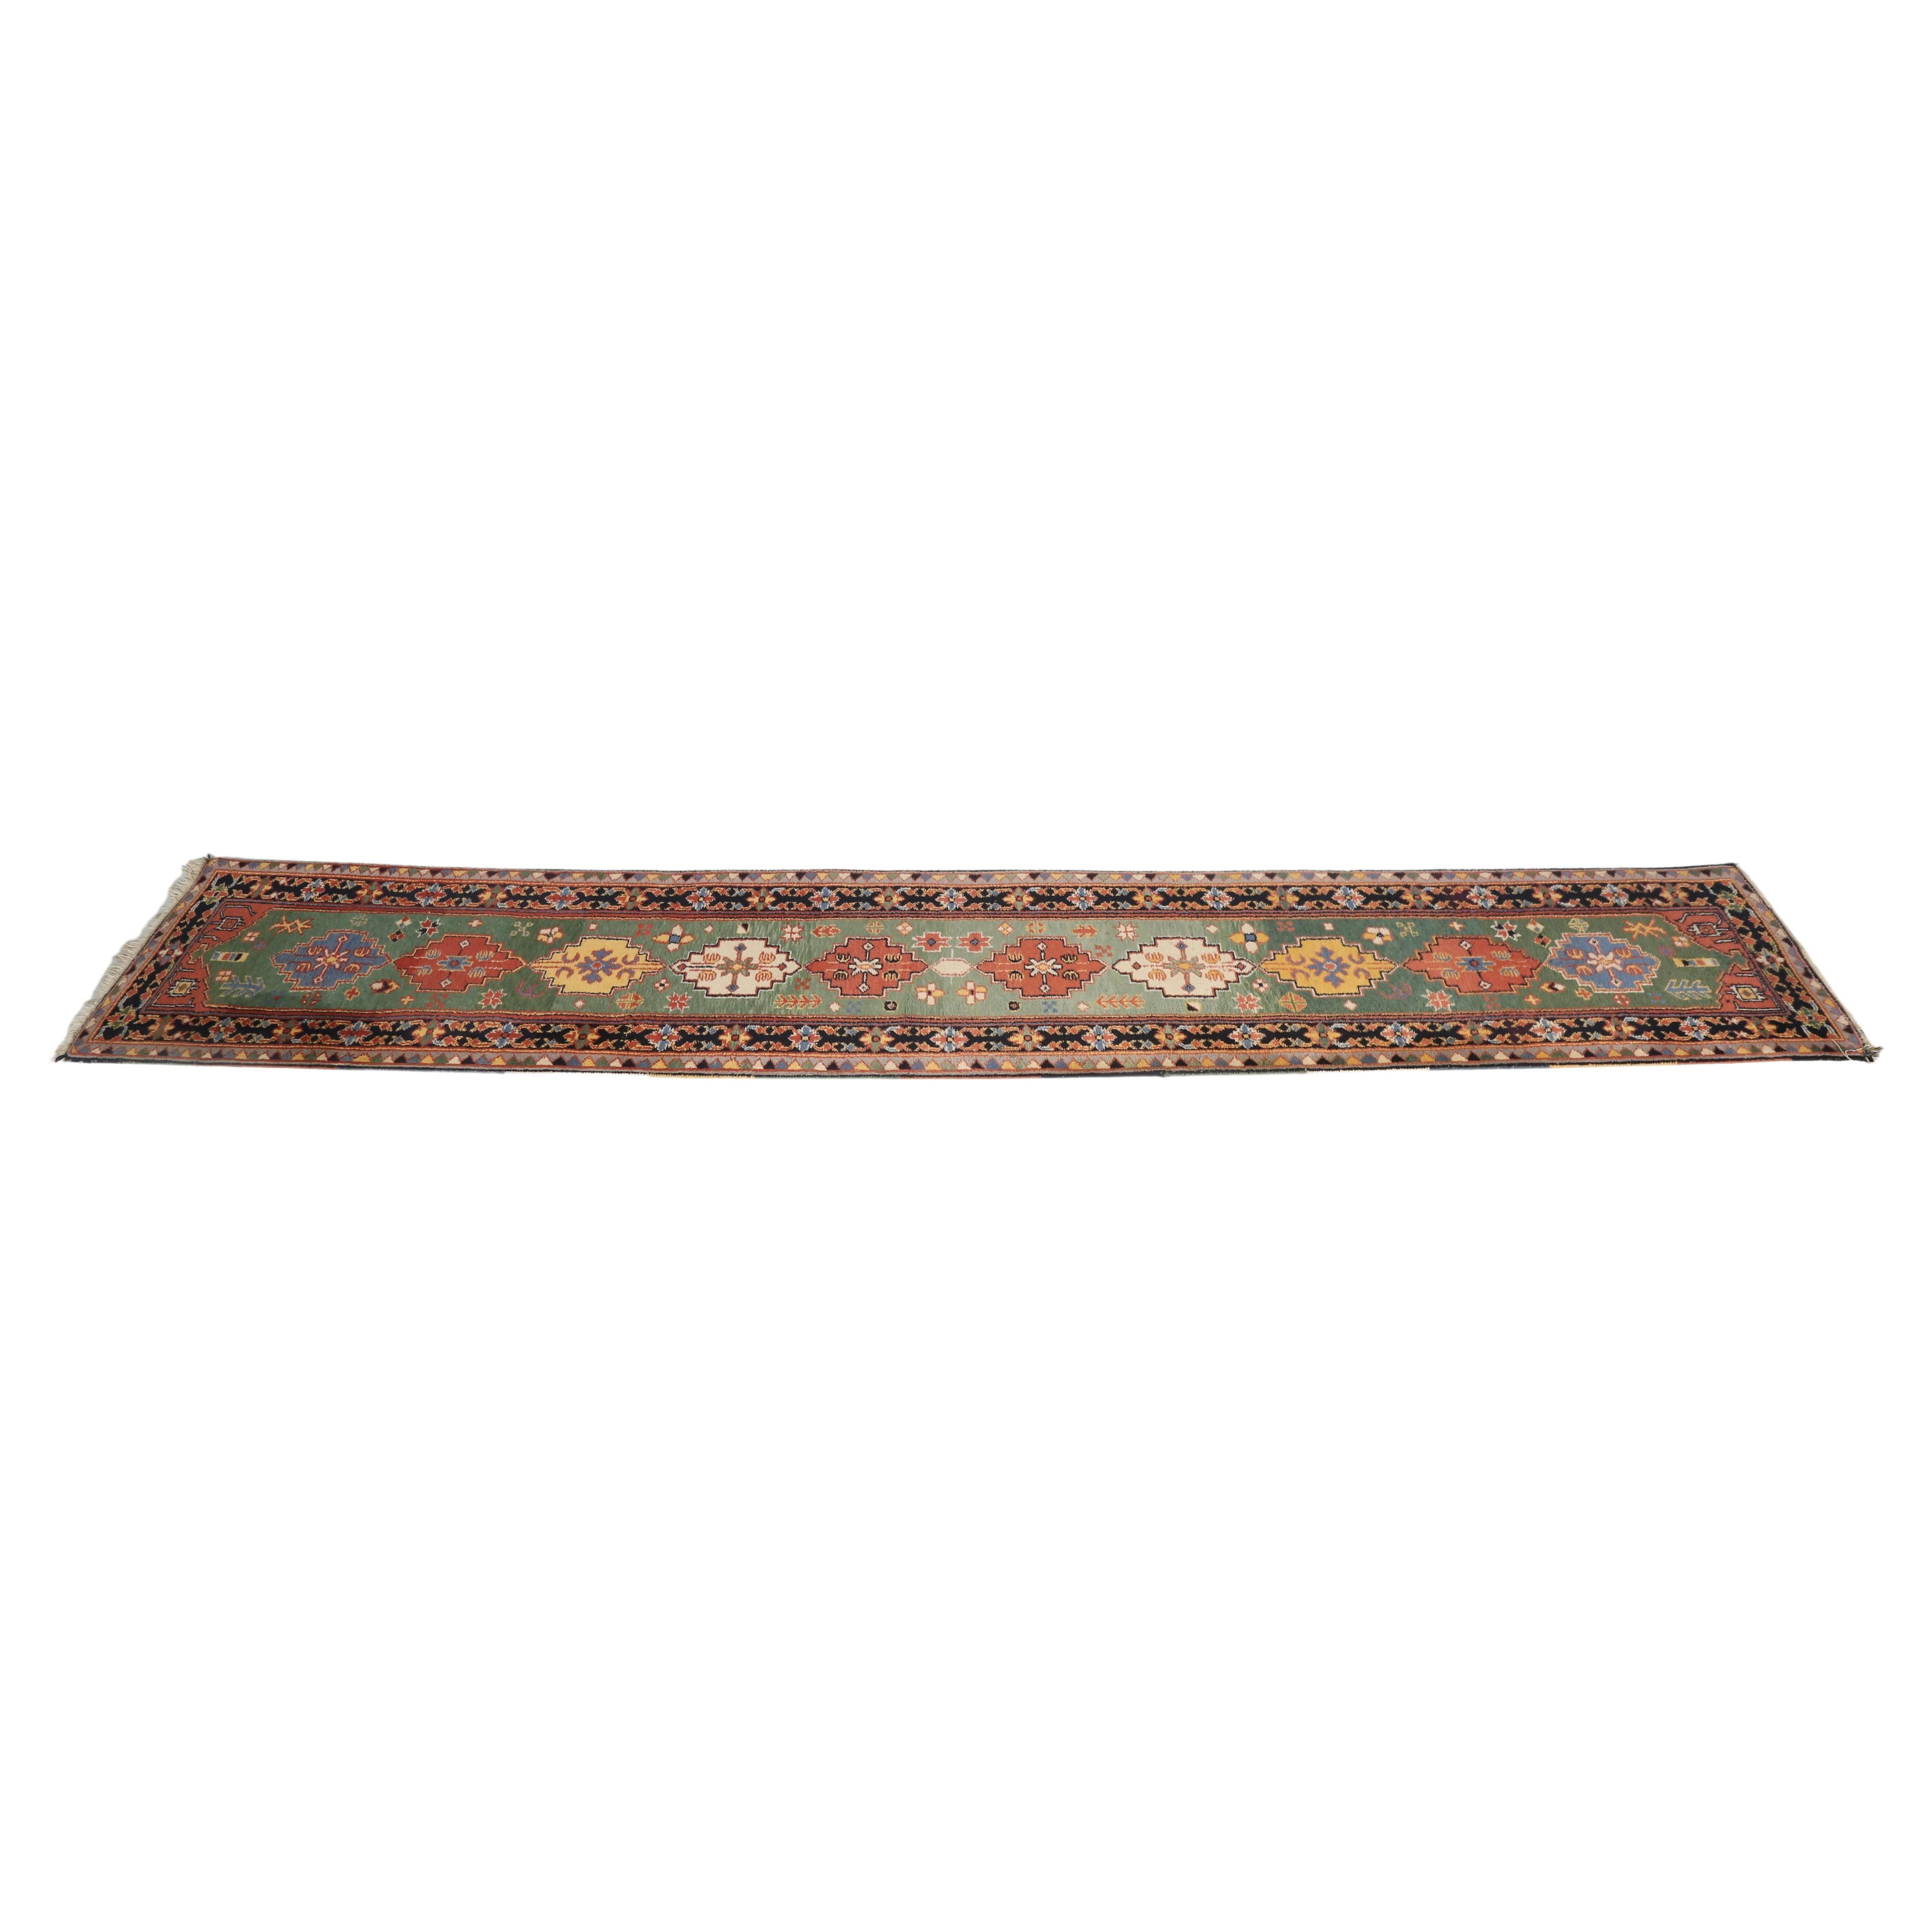 Bakhtiari Style Huge Wool Runner Reproduction Made in India